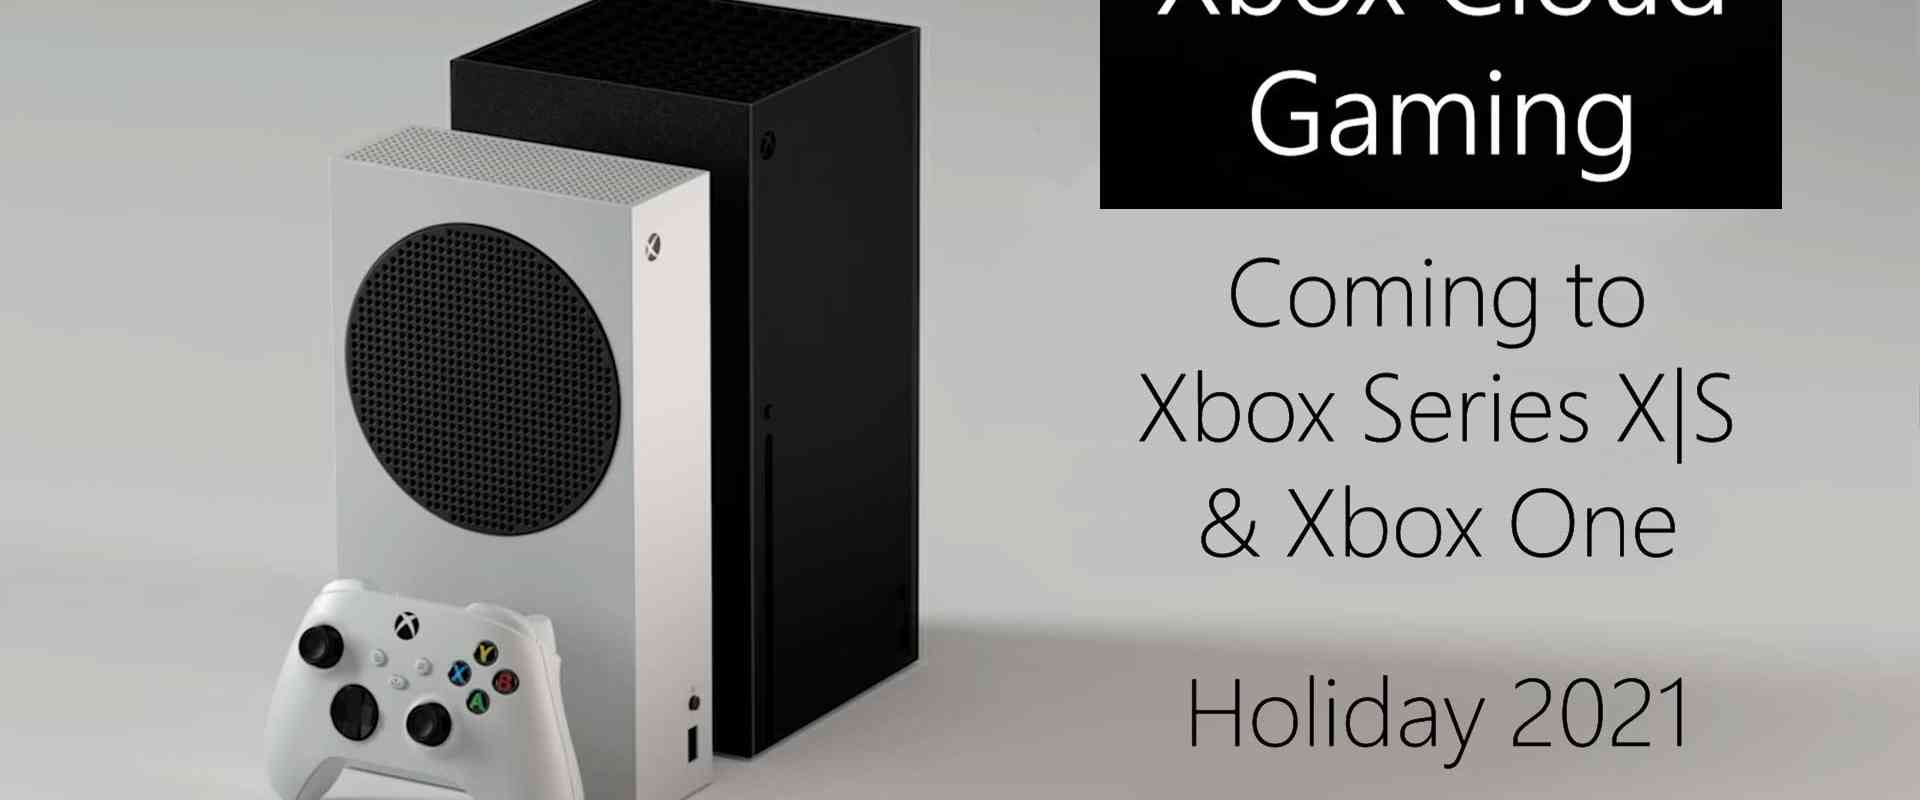 xbox cloud gaming console